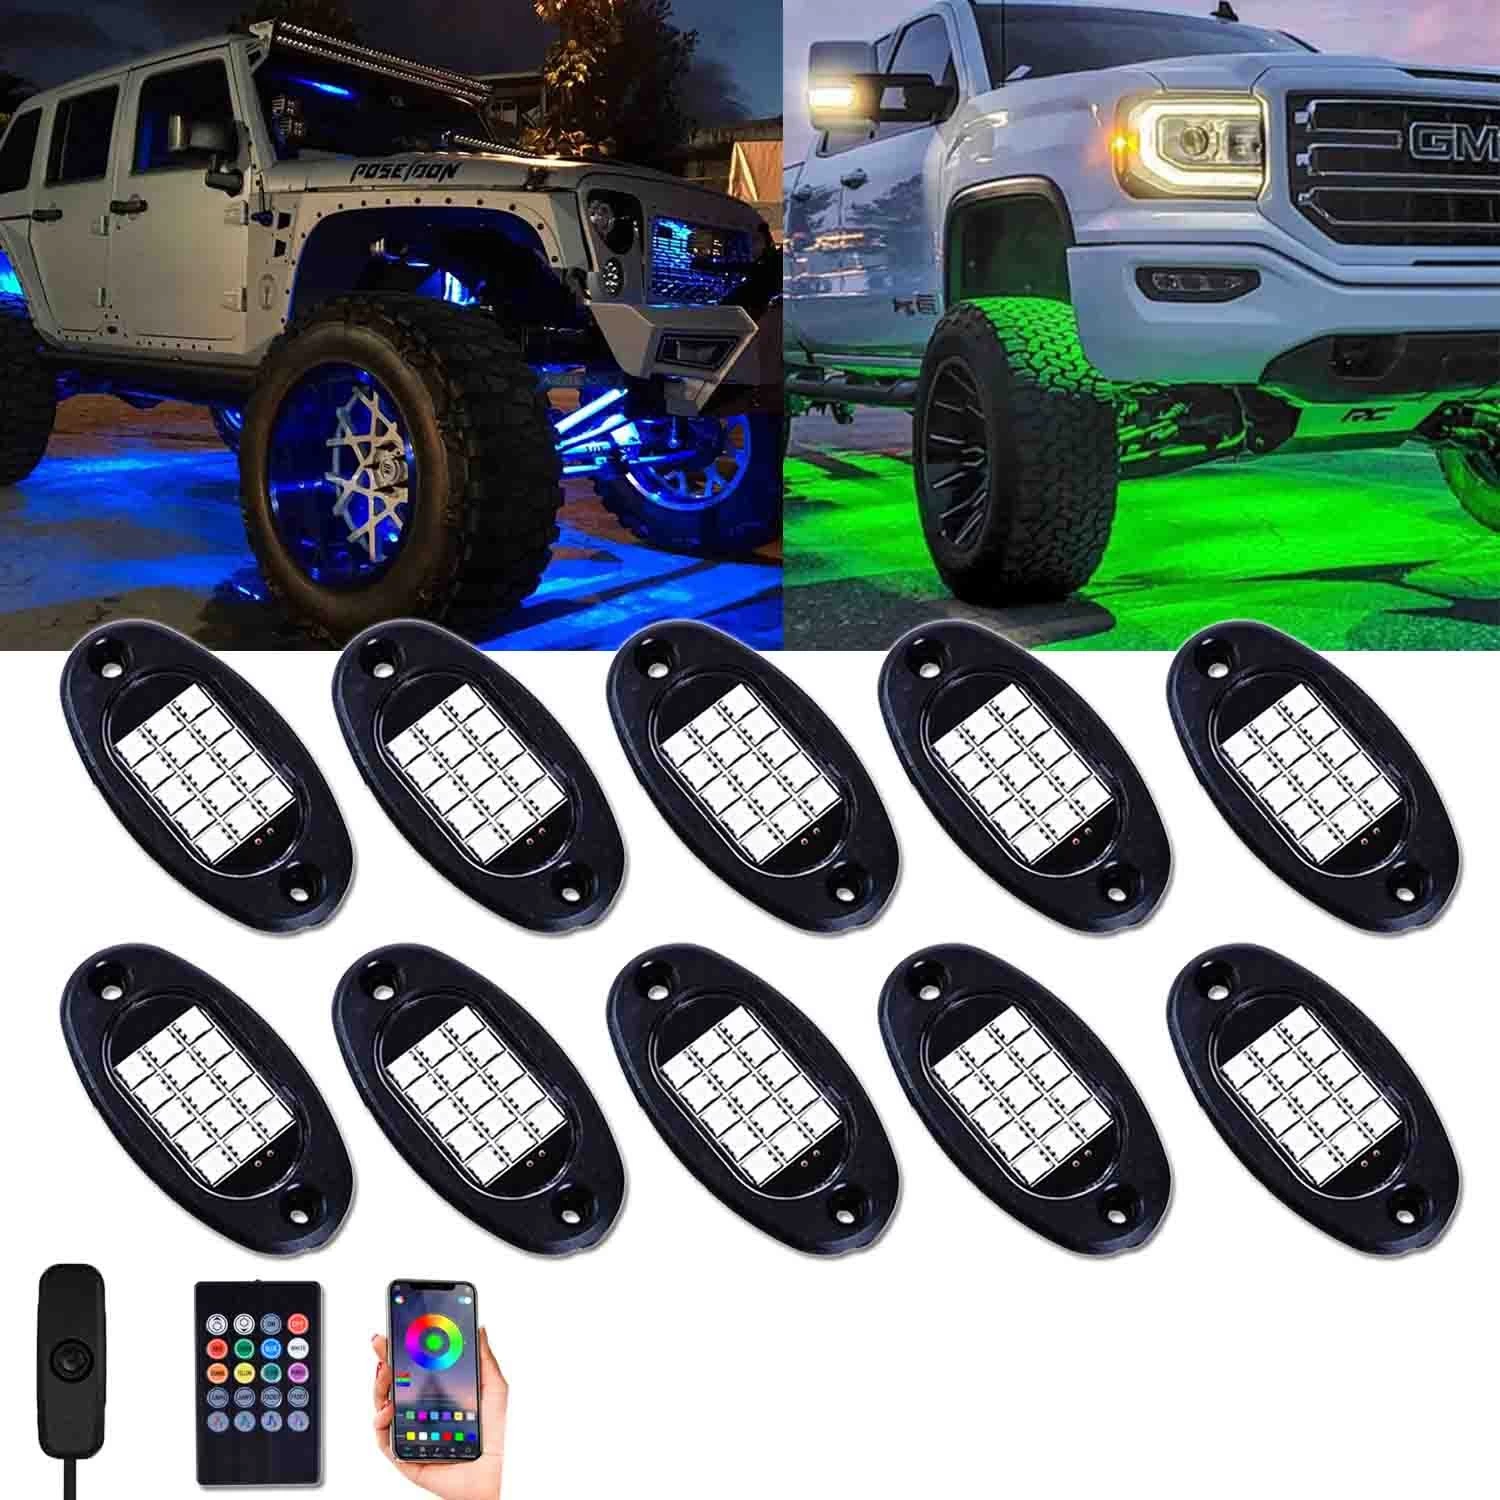 porcelana Unionlux RGB LED Rock Lights 60 LEDs Multicolor Underglow Neon Lights Waterproof Aluminum Light Kit with RF/APP Control Music Mode Timing Function for Truck Jeep Off Road Car UTV ATV SUV 8 Packs fabricante